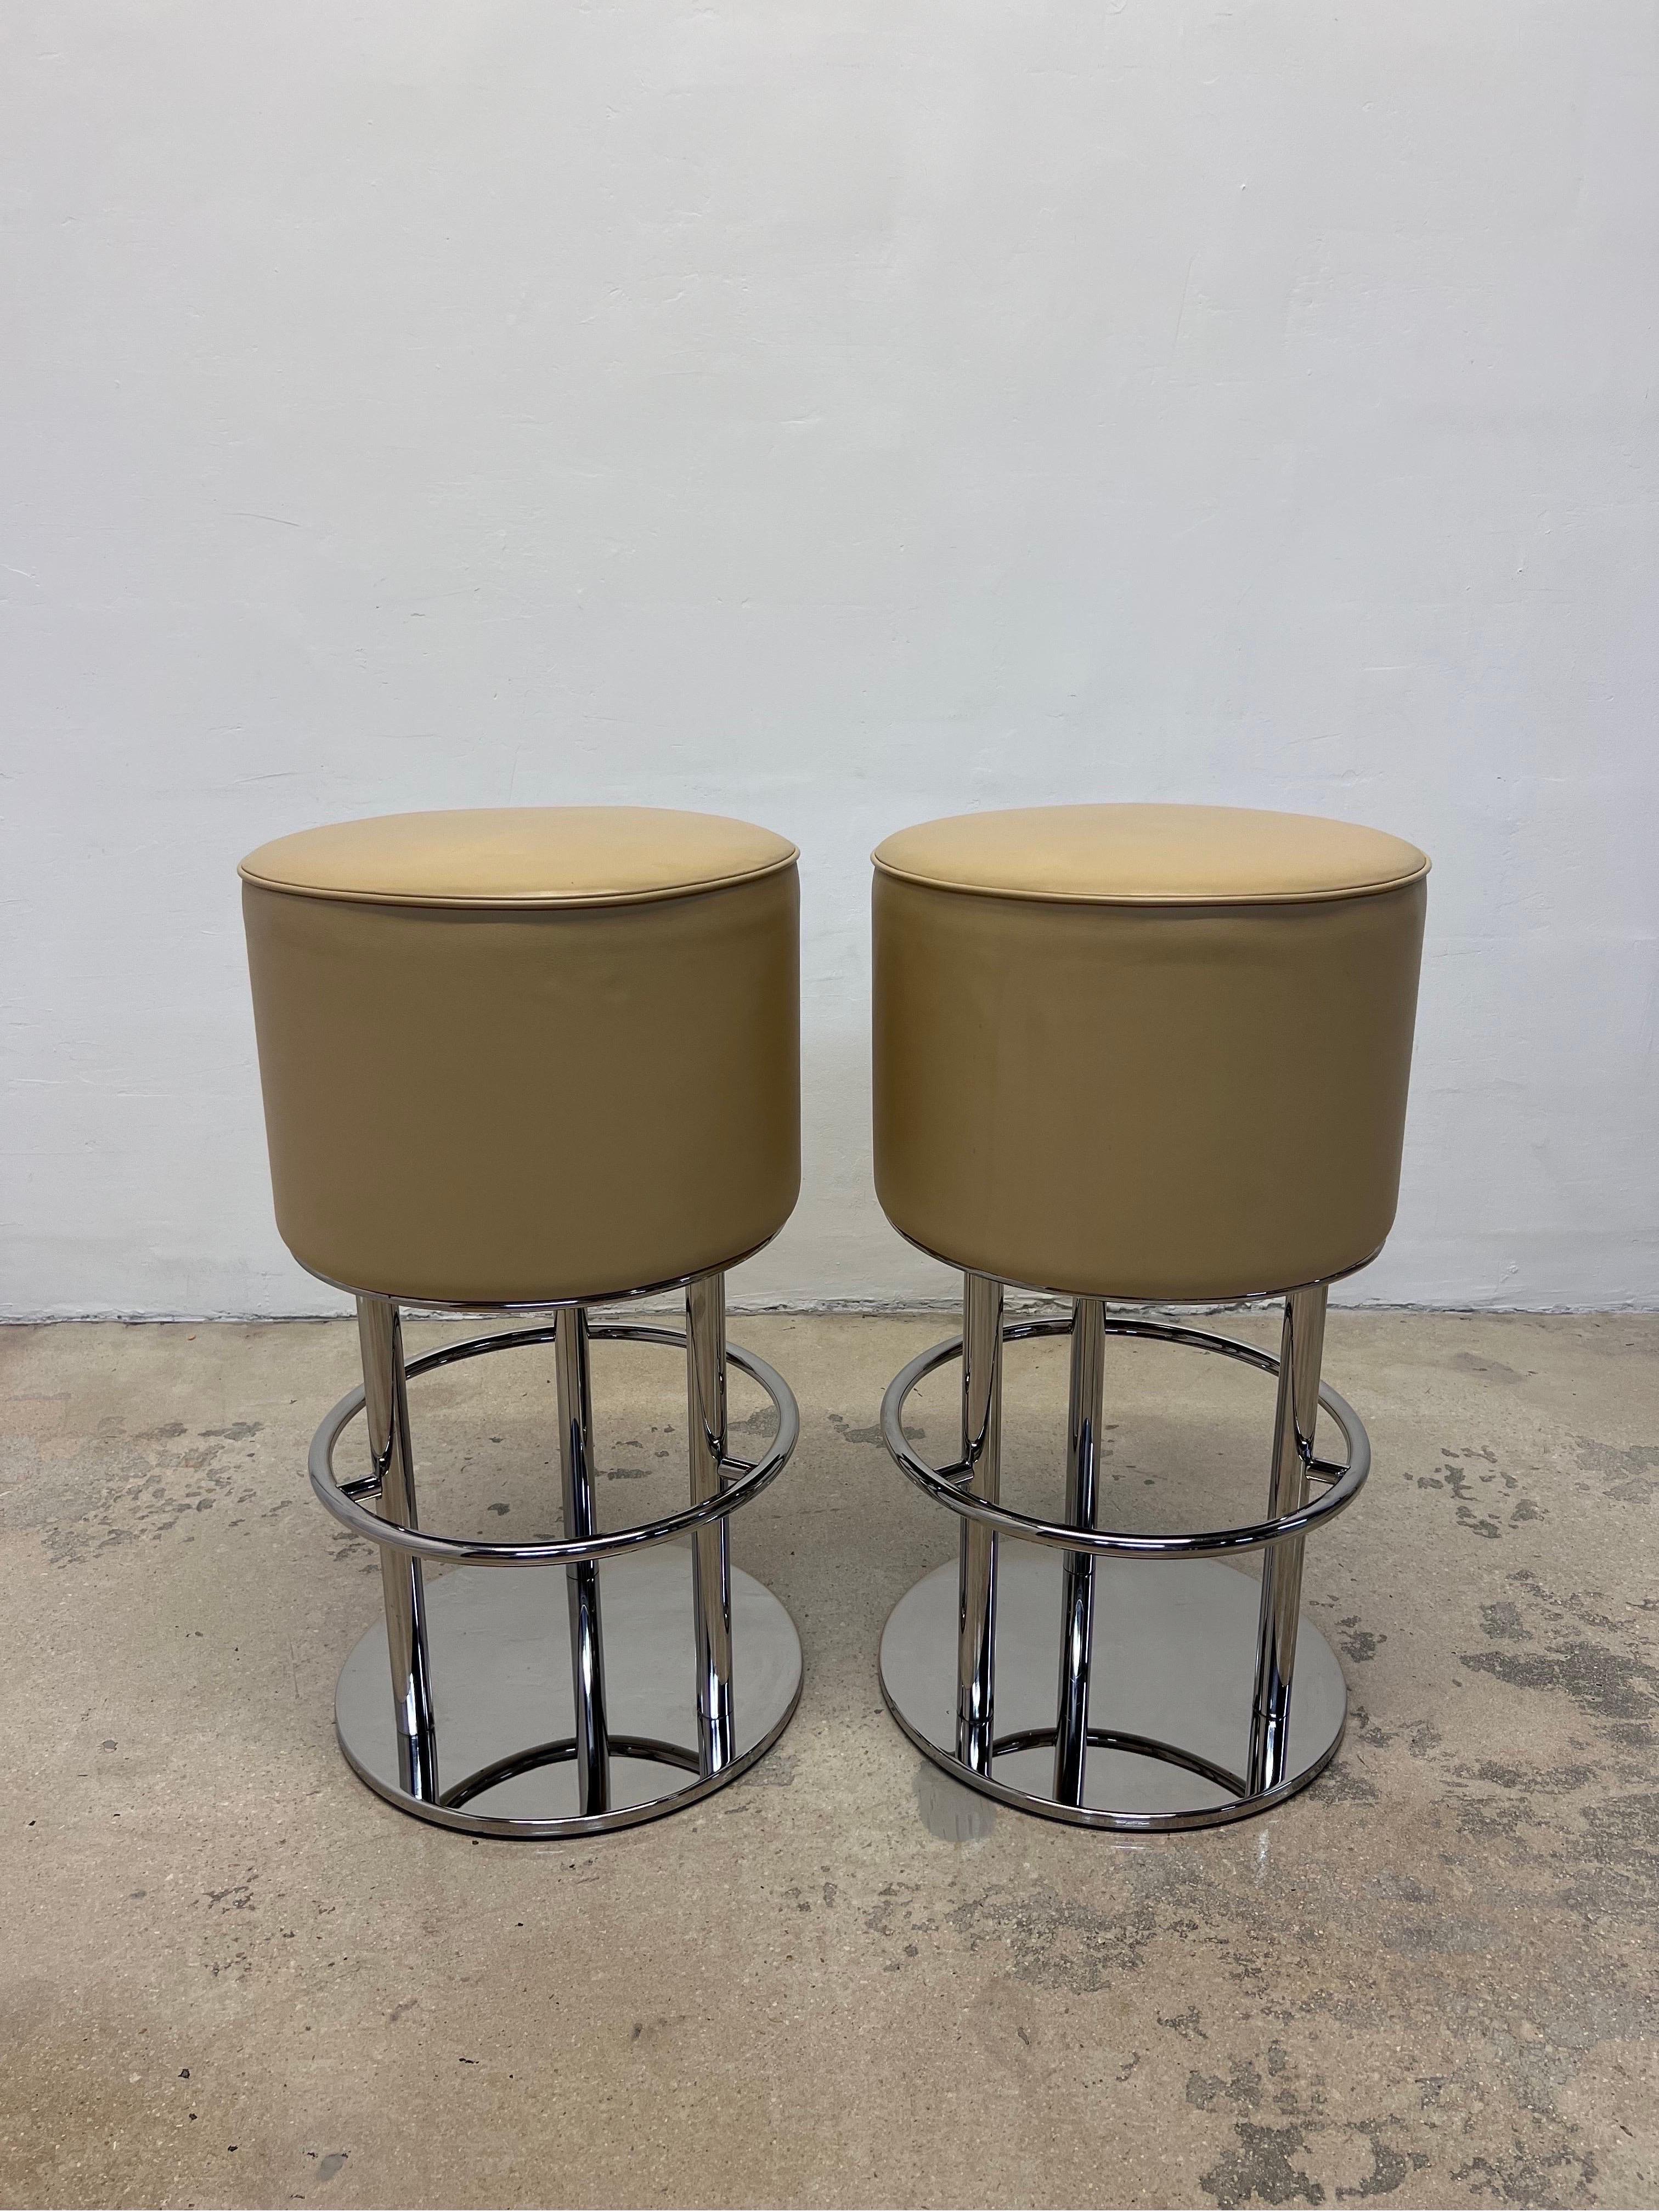 Pair of Scootz bar stools with tubular chrome frame and base with soft tan leather seats by Brueton International.